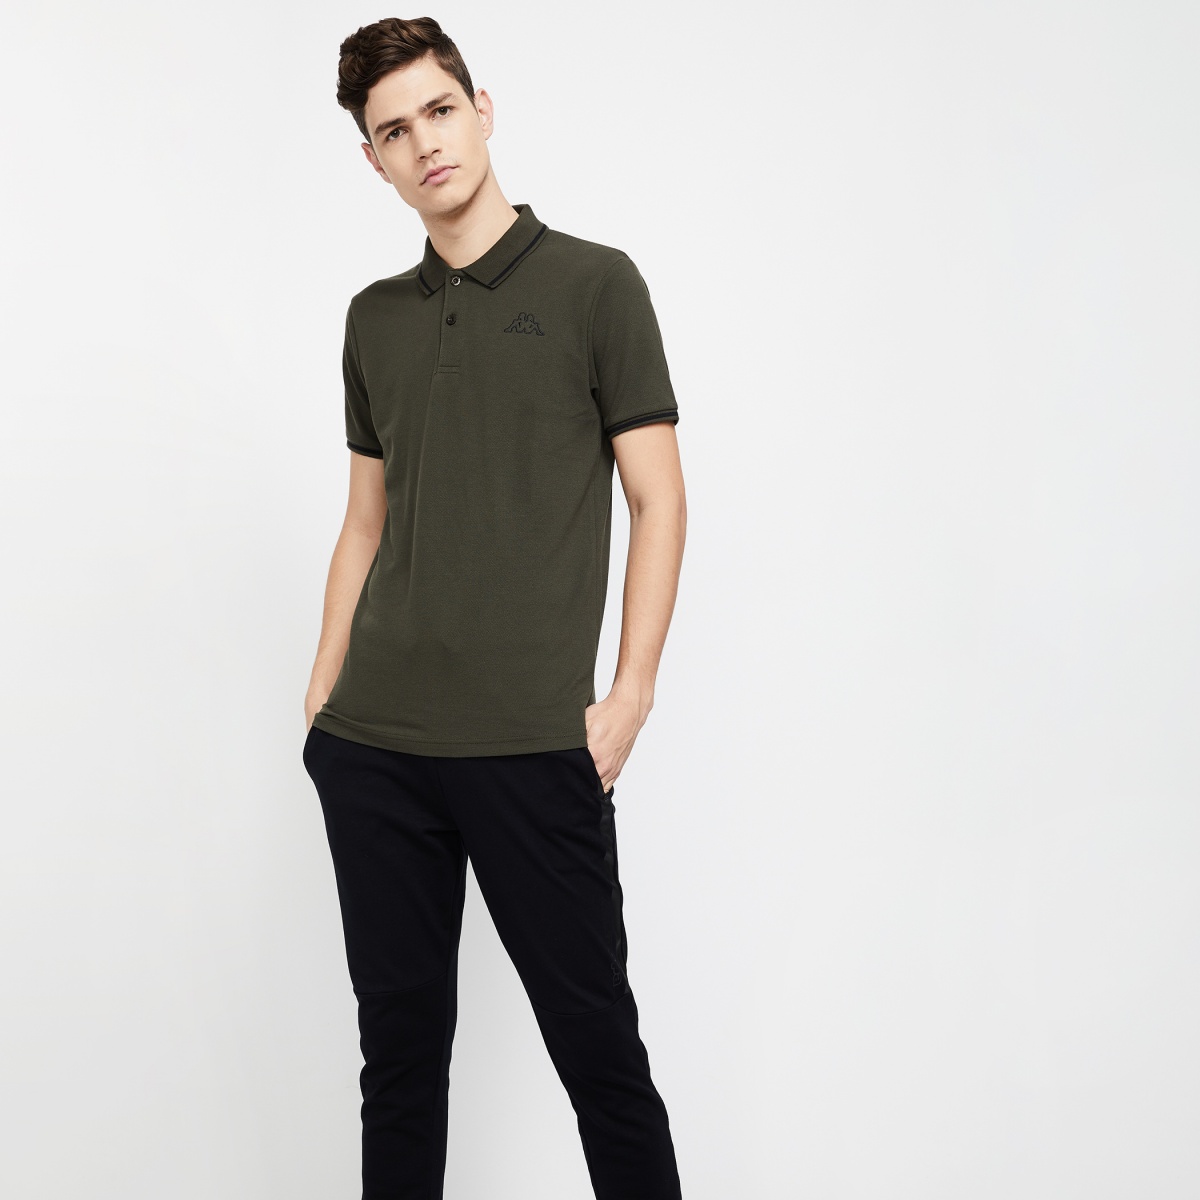 KAPPA Regular Fit Contrast Tipping Pique Knit Polo T-shirt